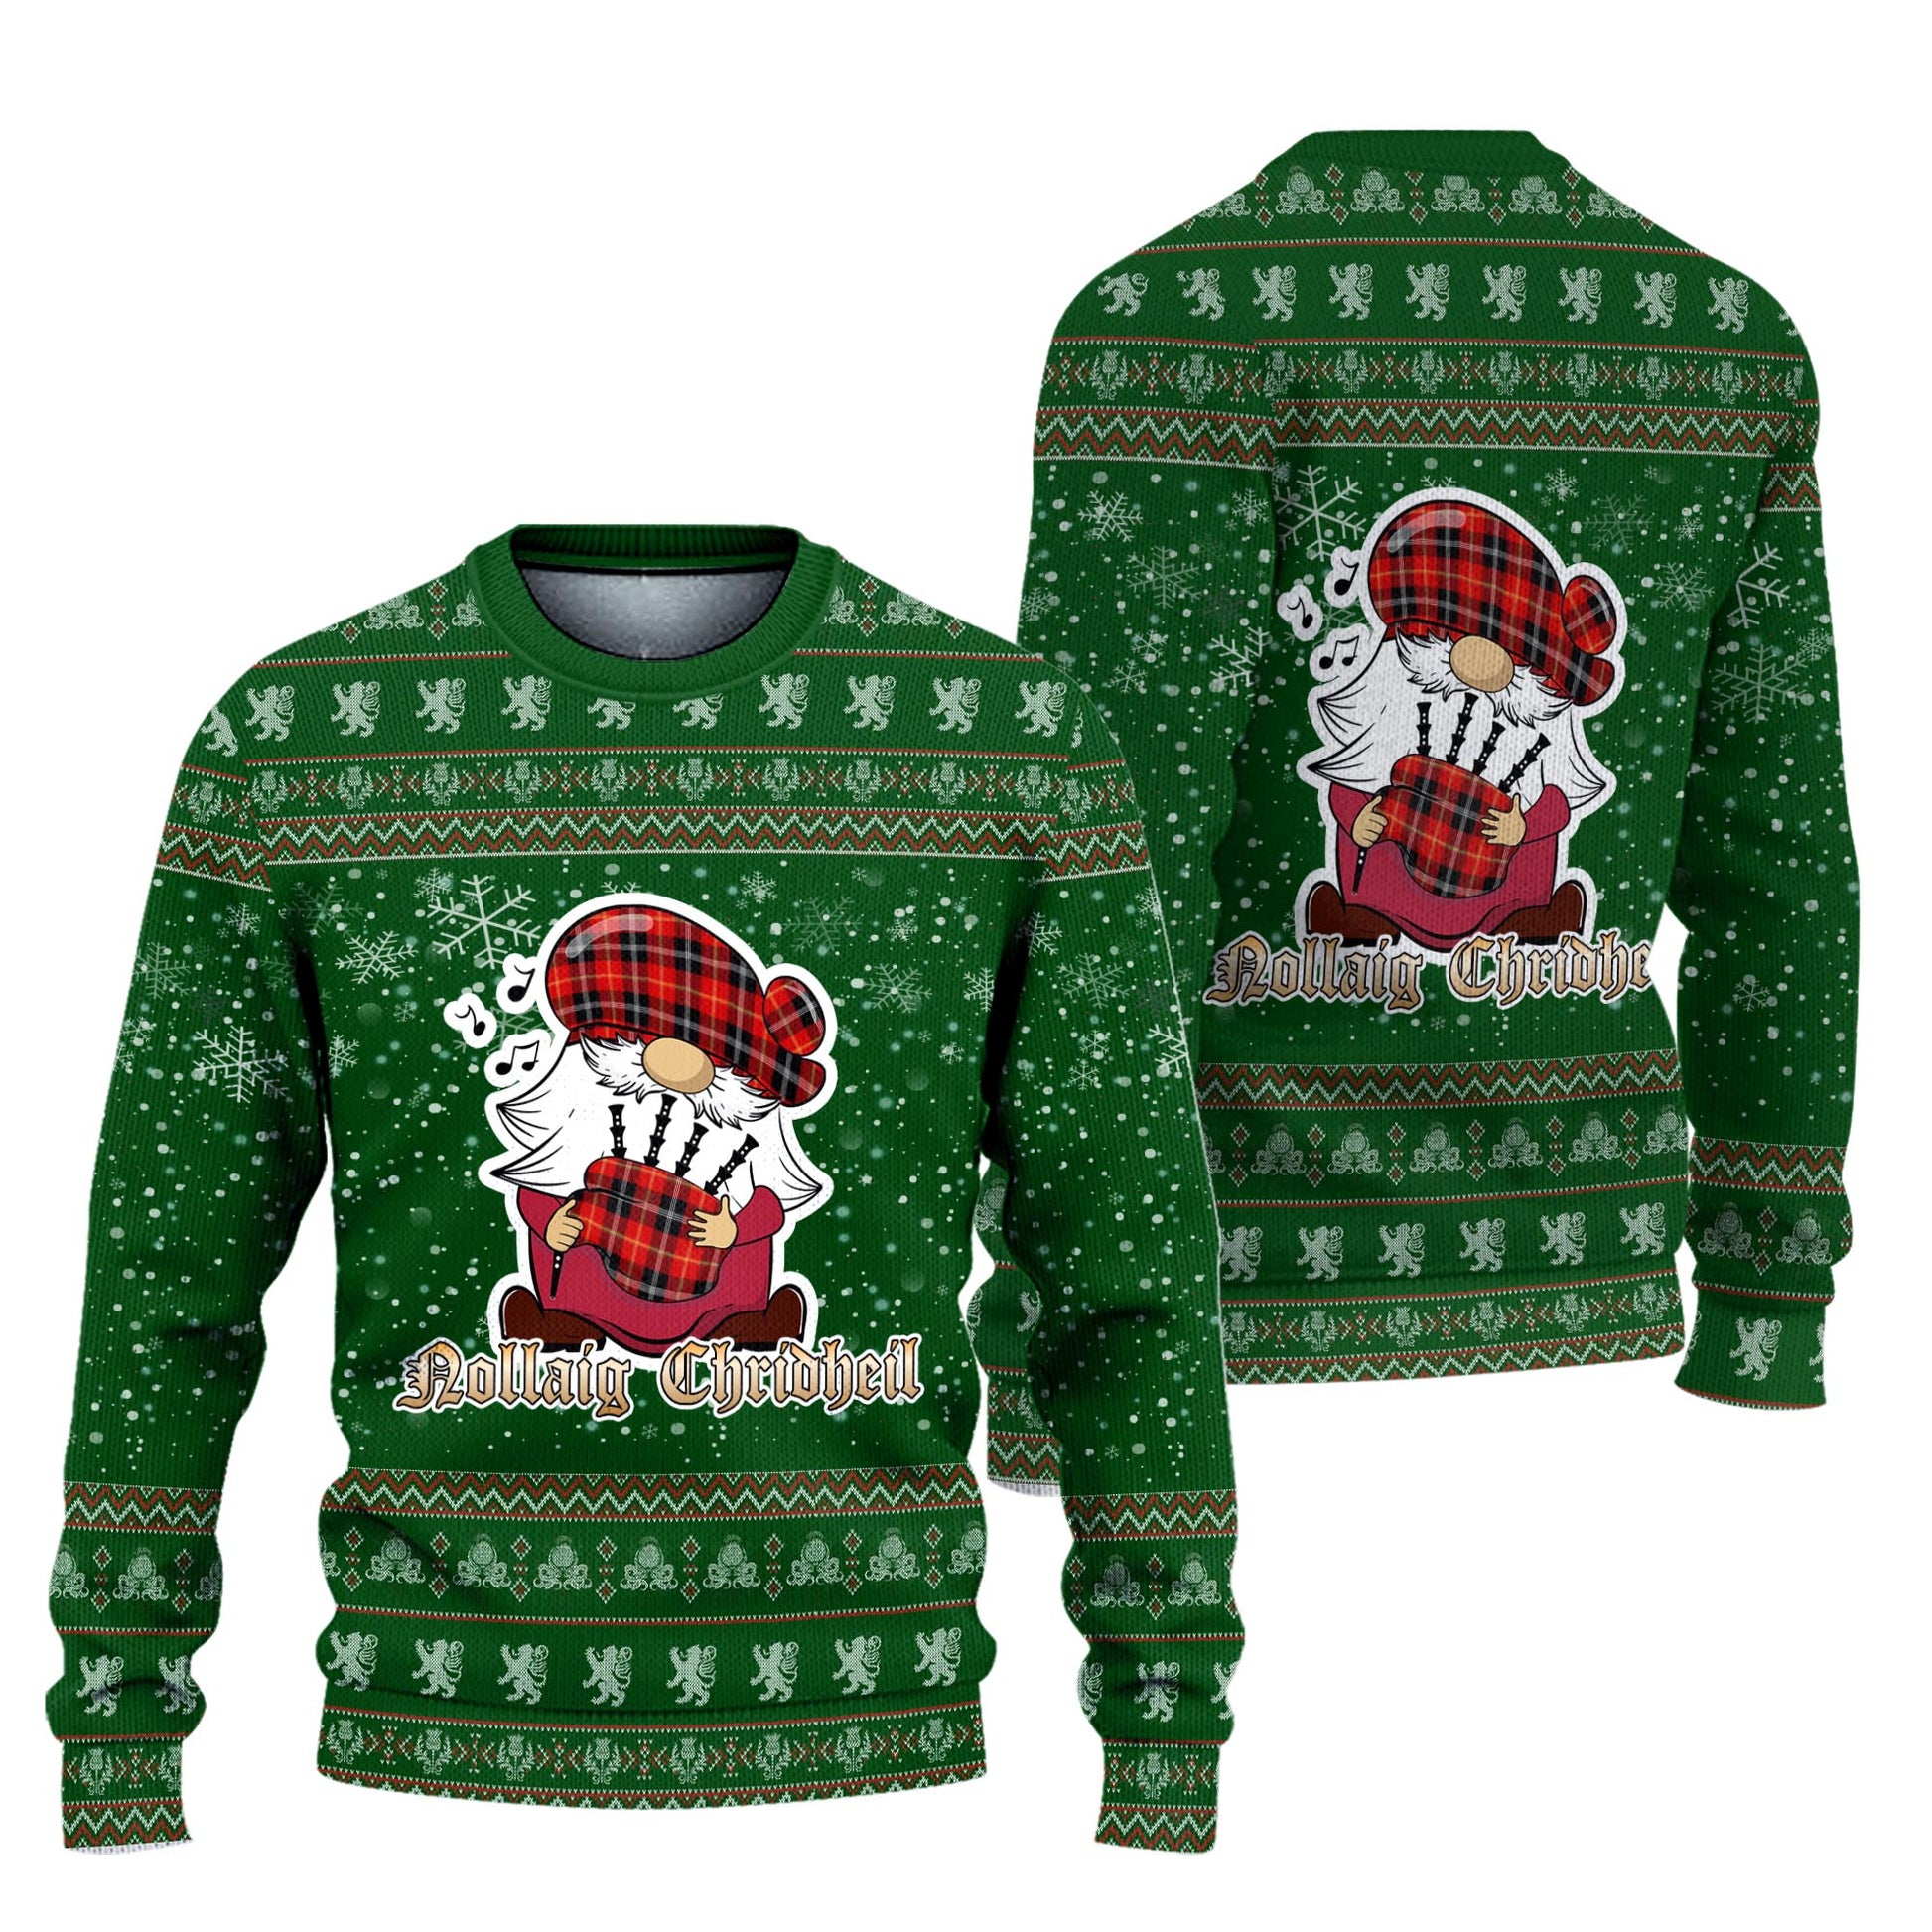 Majoribanks Clan Christmas Family Knitted Sweater with Funny Gnome Playing Bagpipes Unisex Green - Tartanvibesclothing